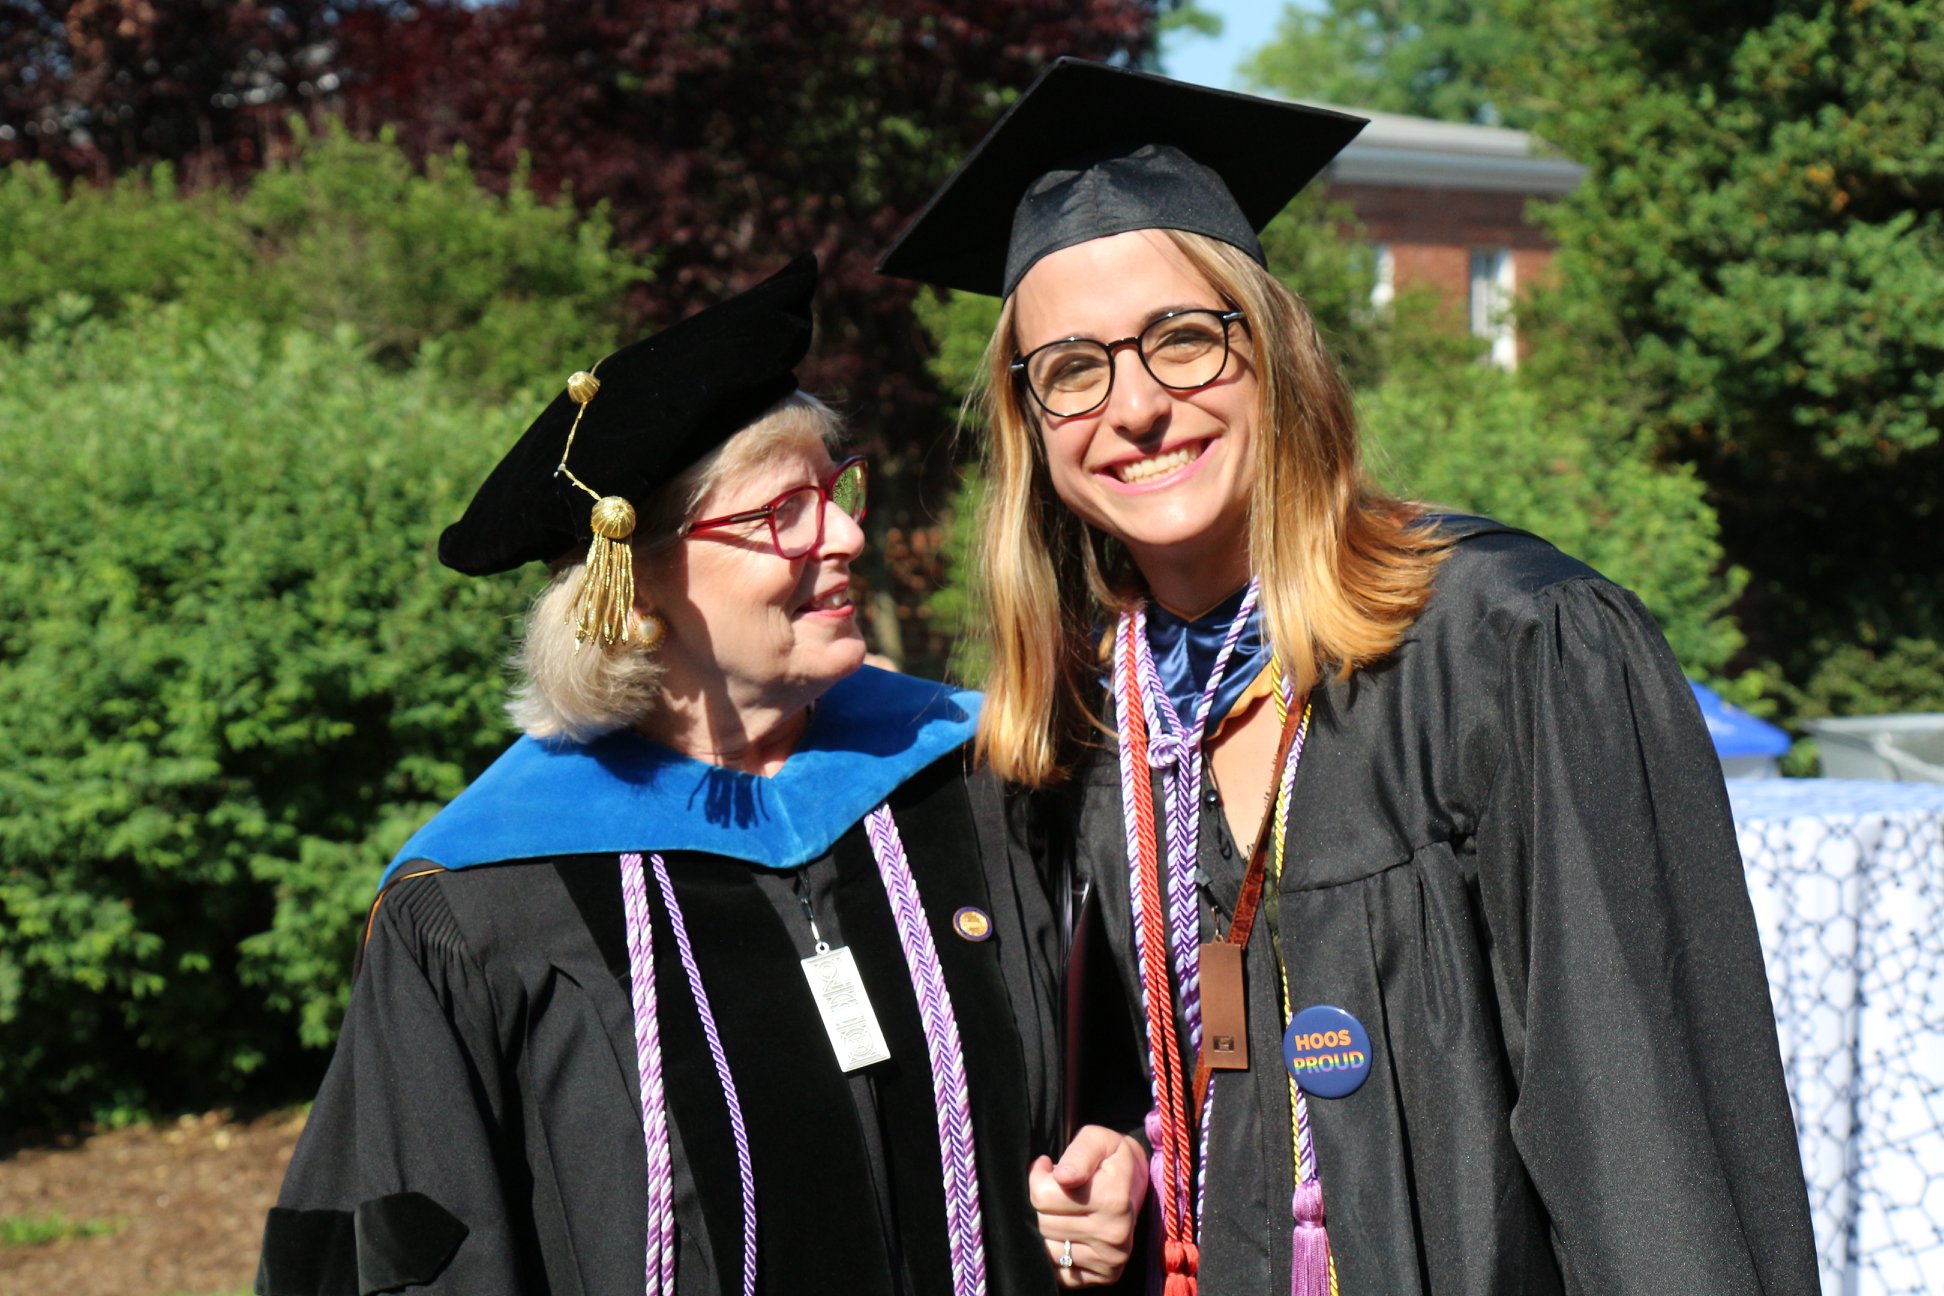 Dallas Ducar, right, with Dorrie Fontaine, wearing graduation attire pose together for a picture